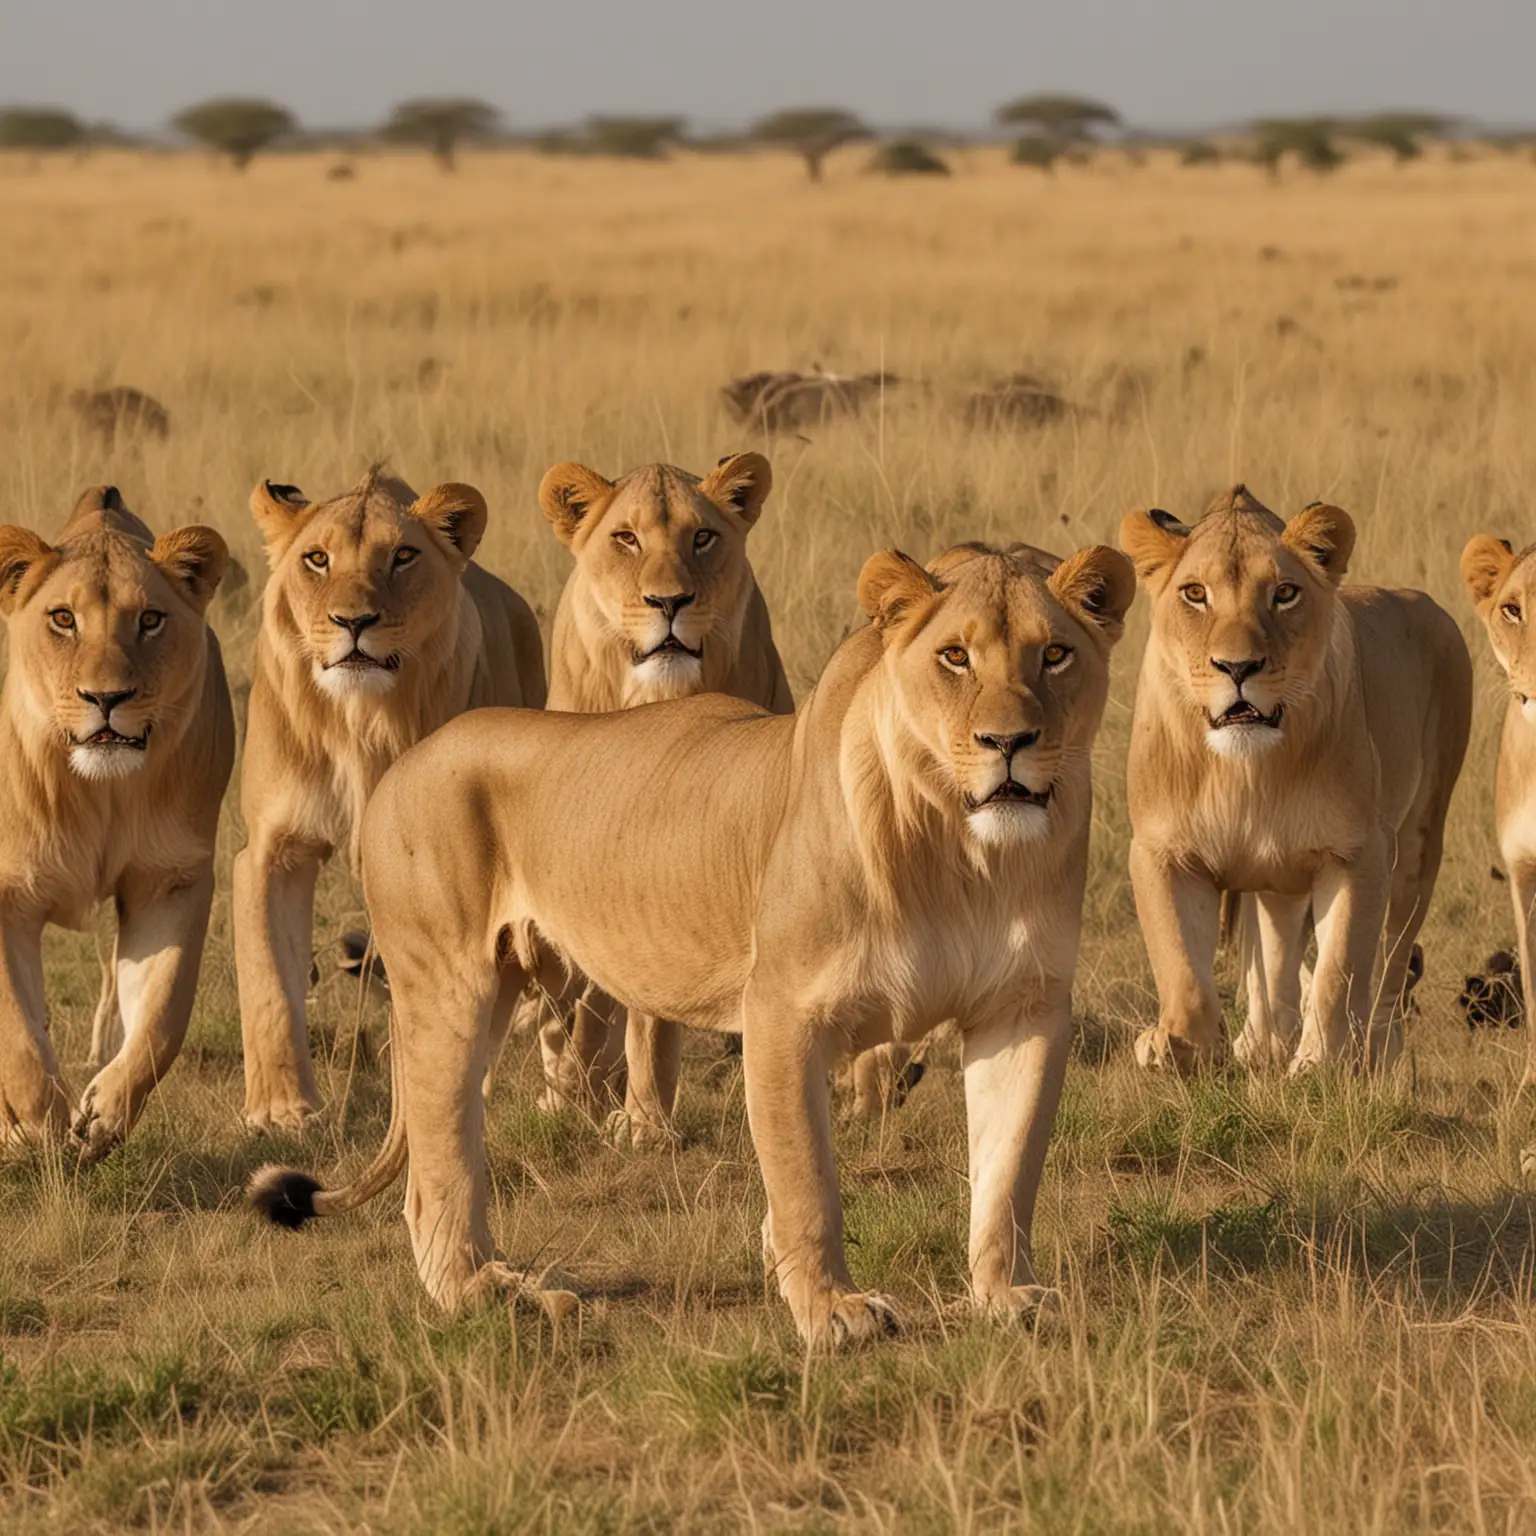 A Pride of Lions Roaming the African Savanna